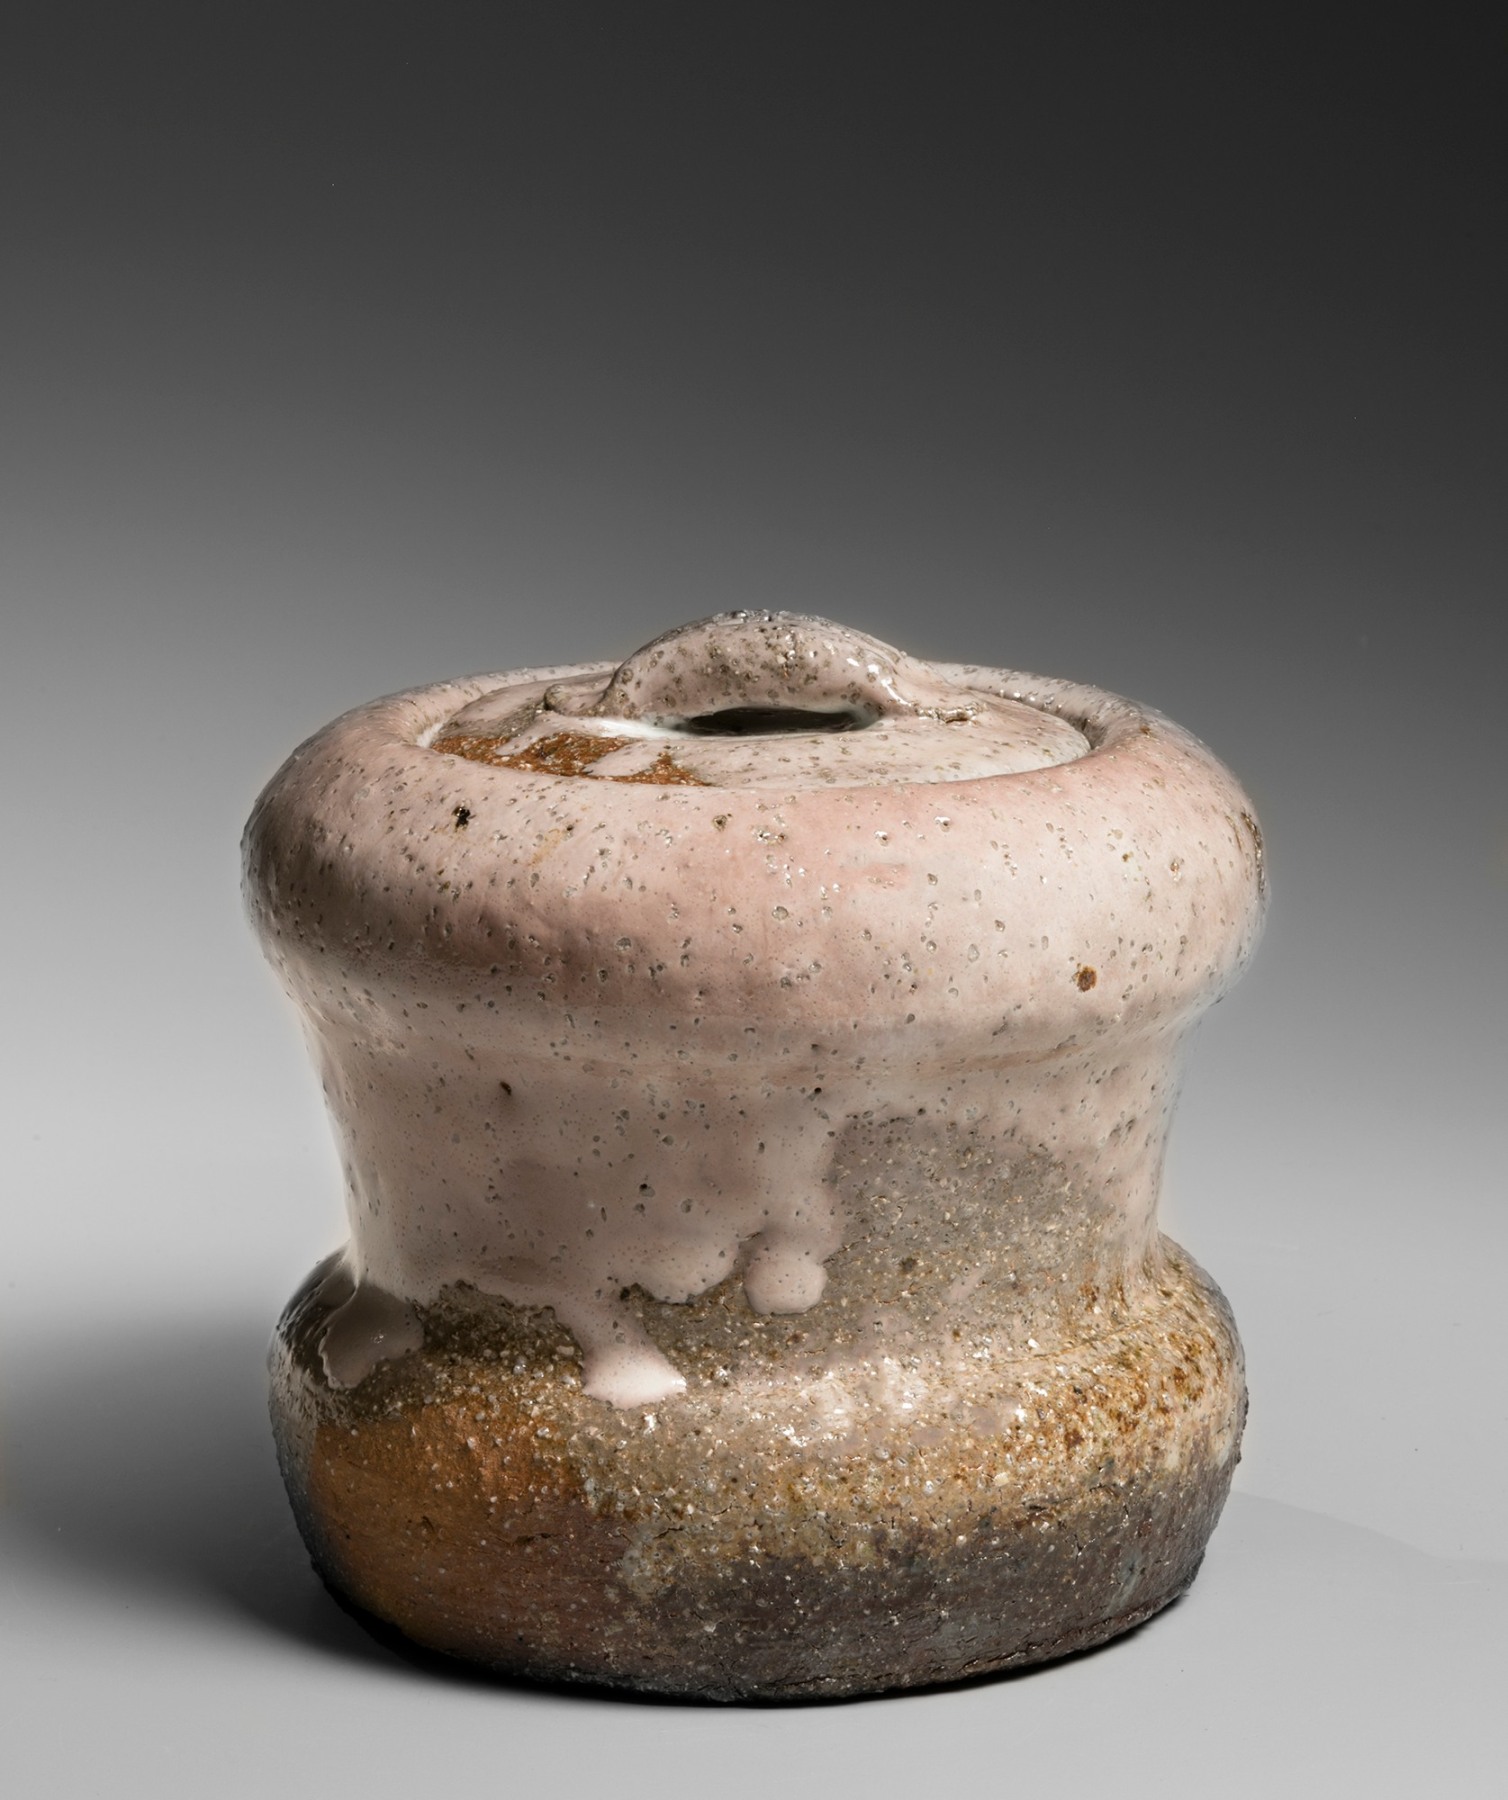 Branching Out - Kaneshige Family and Bizen Tradition - Exhibitions - Joan B Mirviss LTD | Japanese Fine Art | Japanese Ceramics